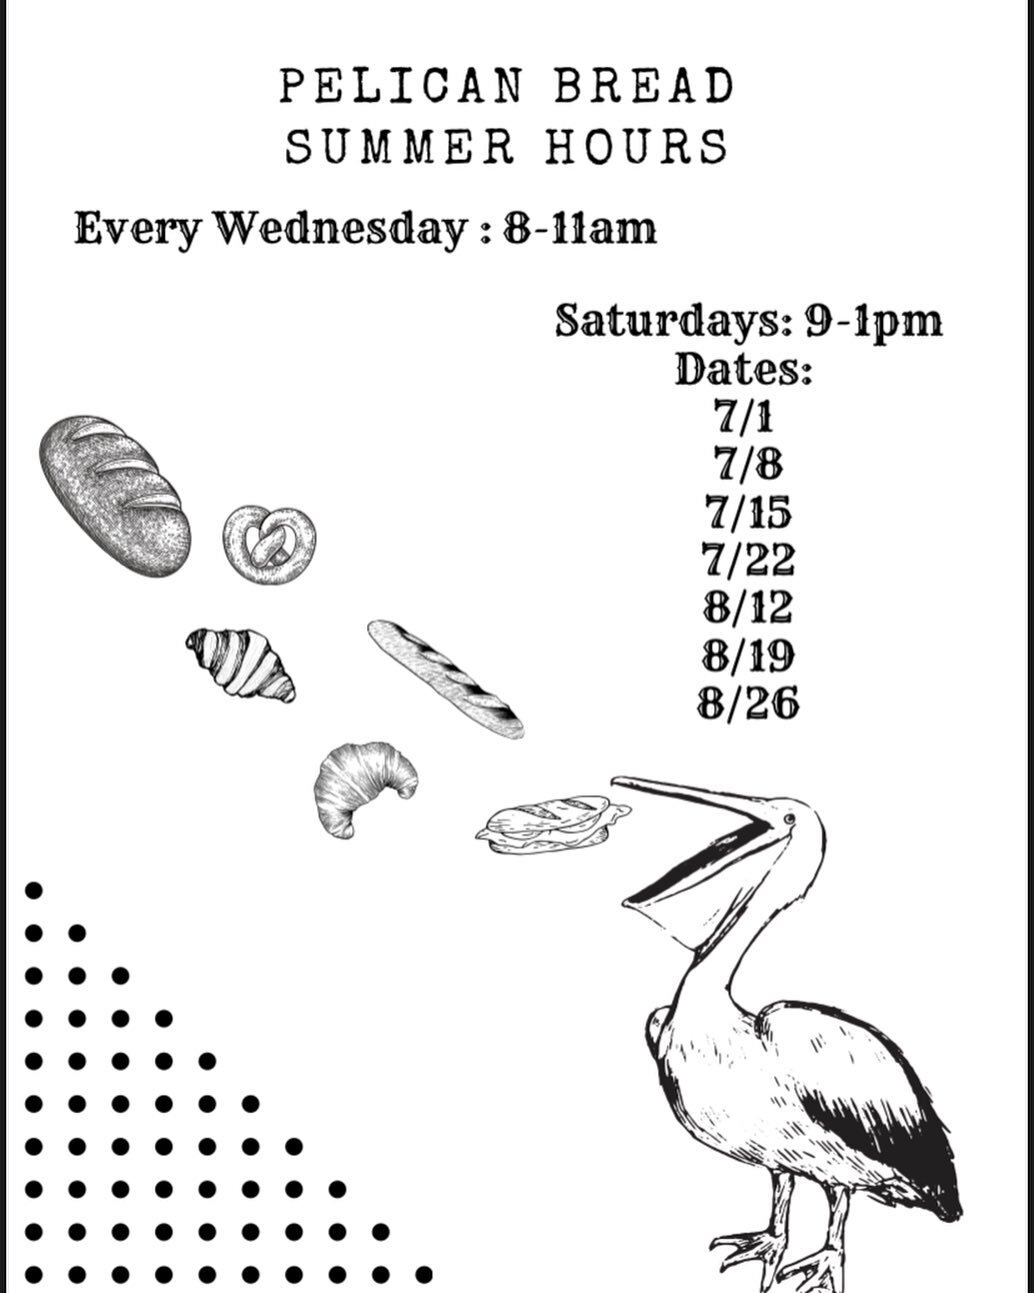 Check out our summer hours!